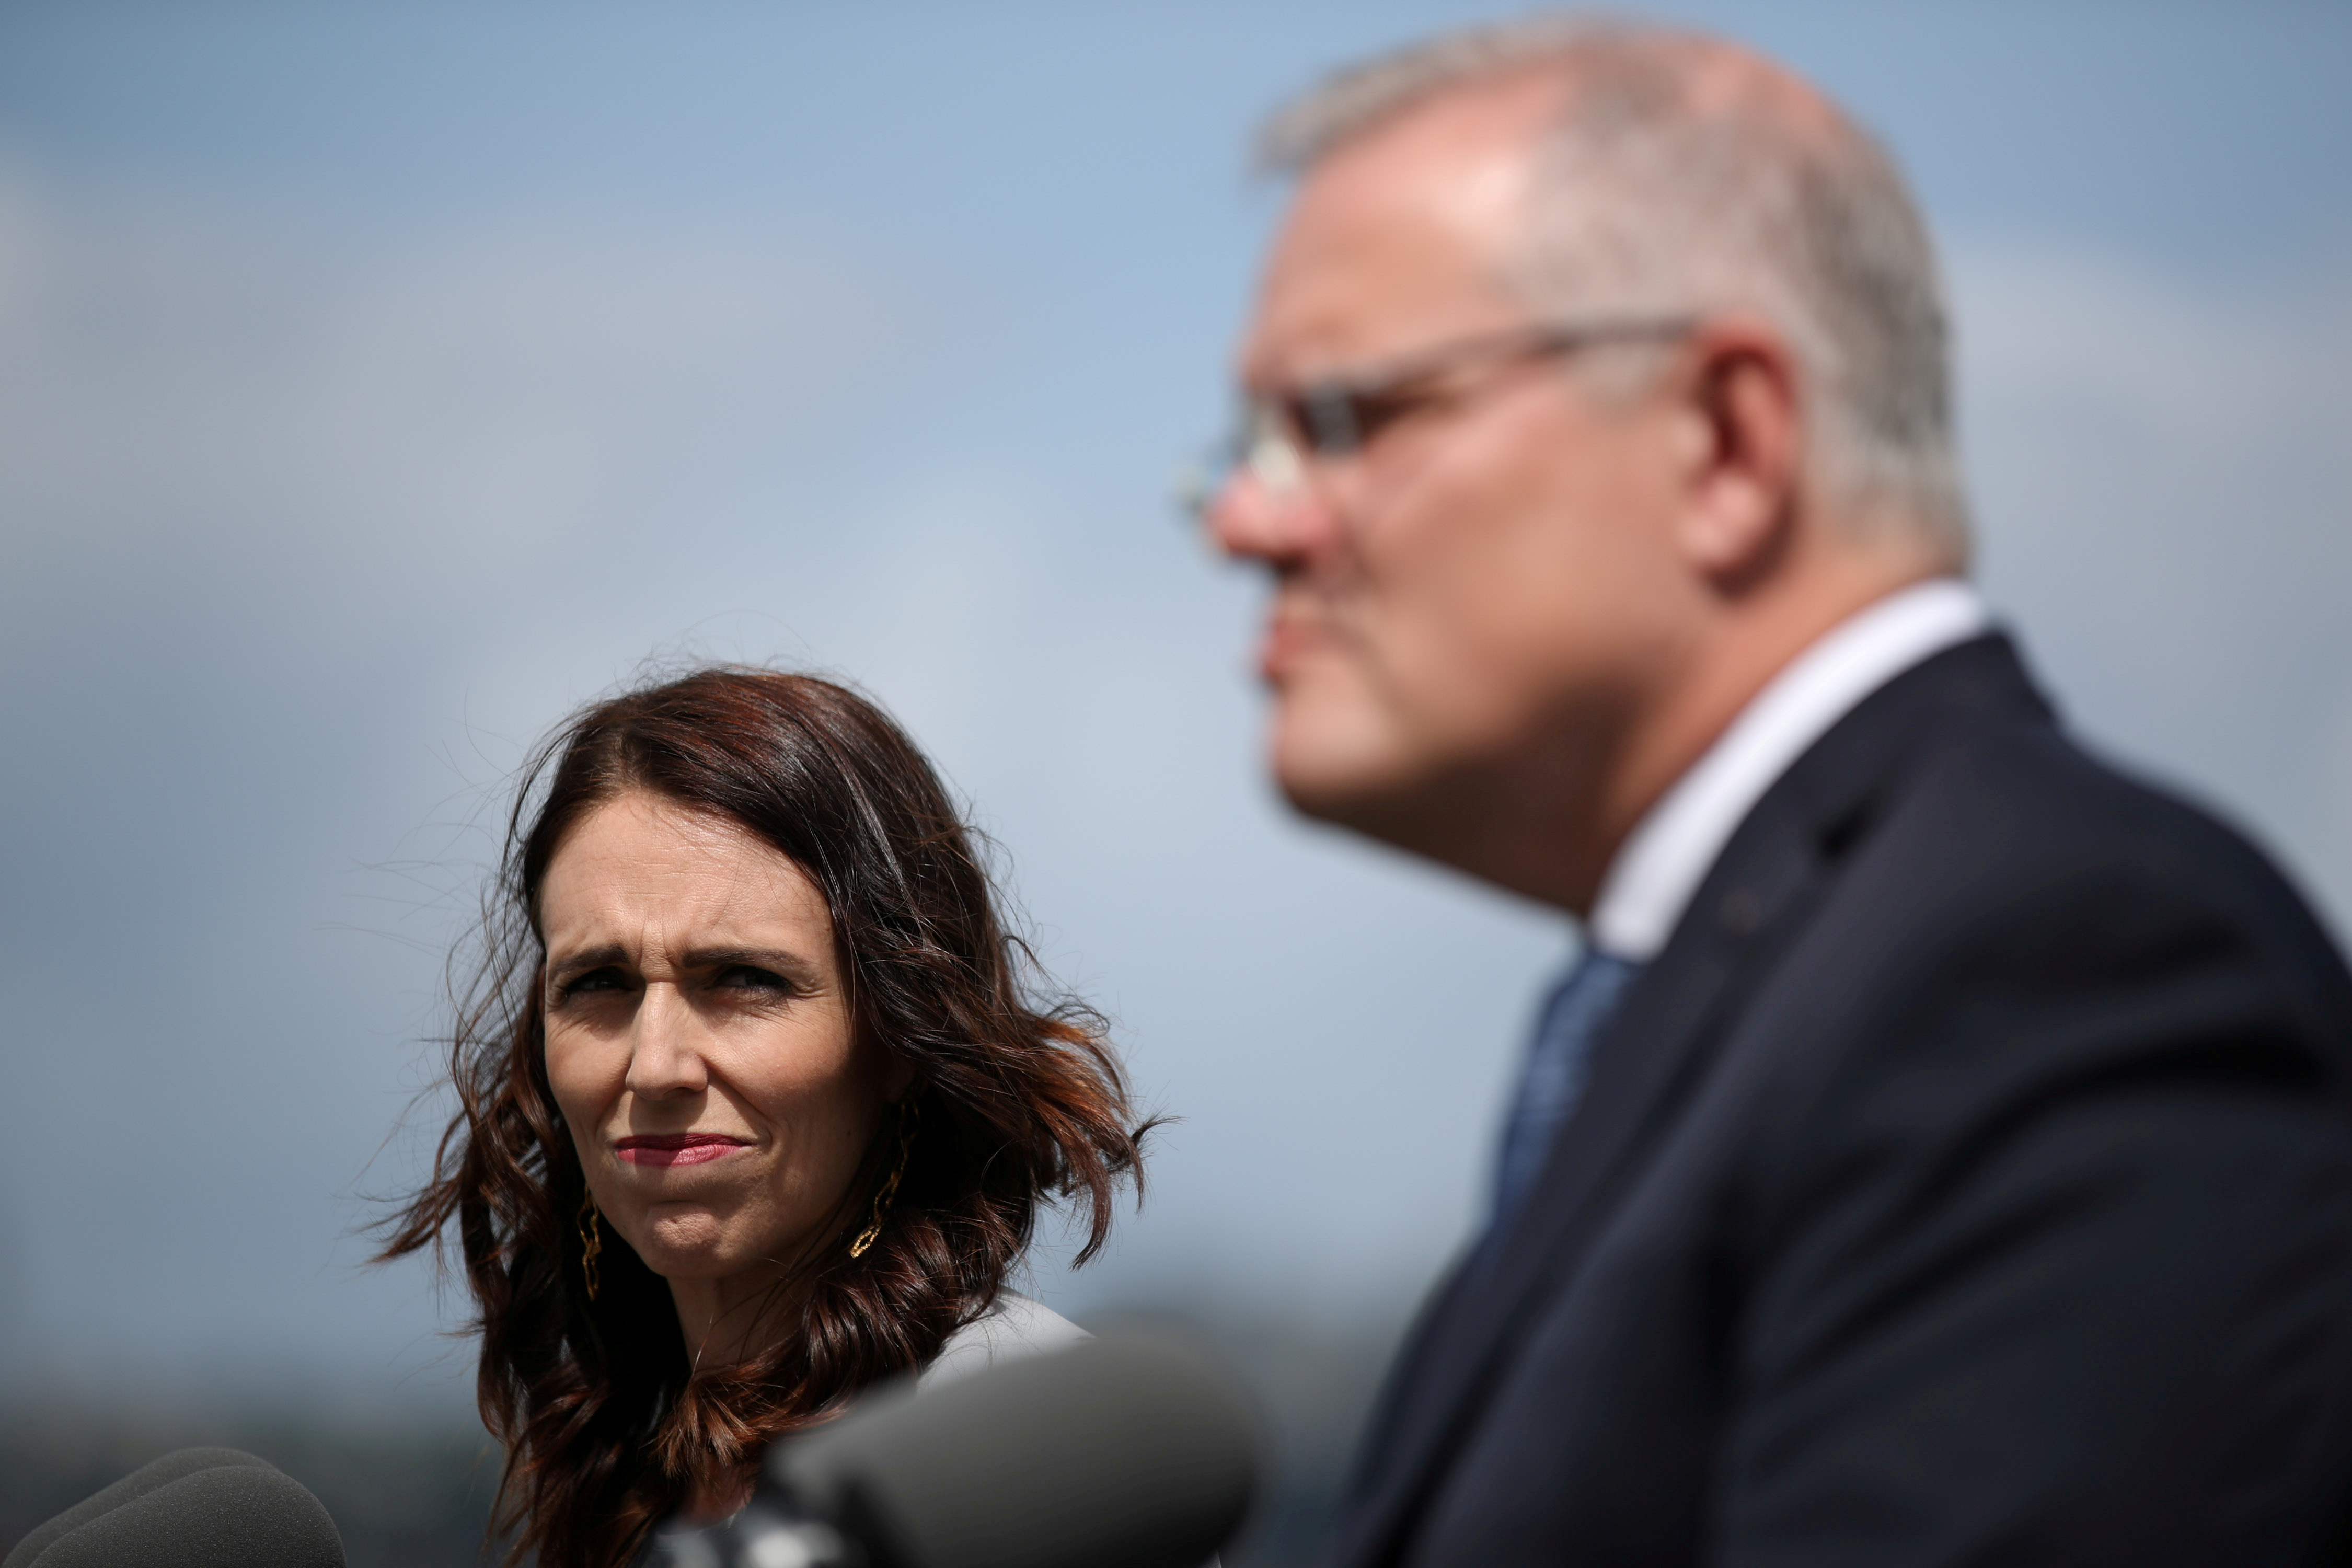 New Zealand Prime Minister Ardern and Australian Prime Minister Morrison hold a joint press conference at Admiralty House in Sydney